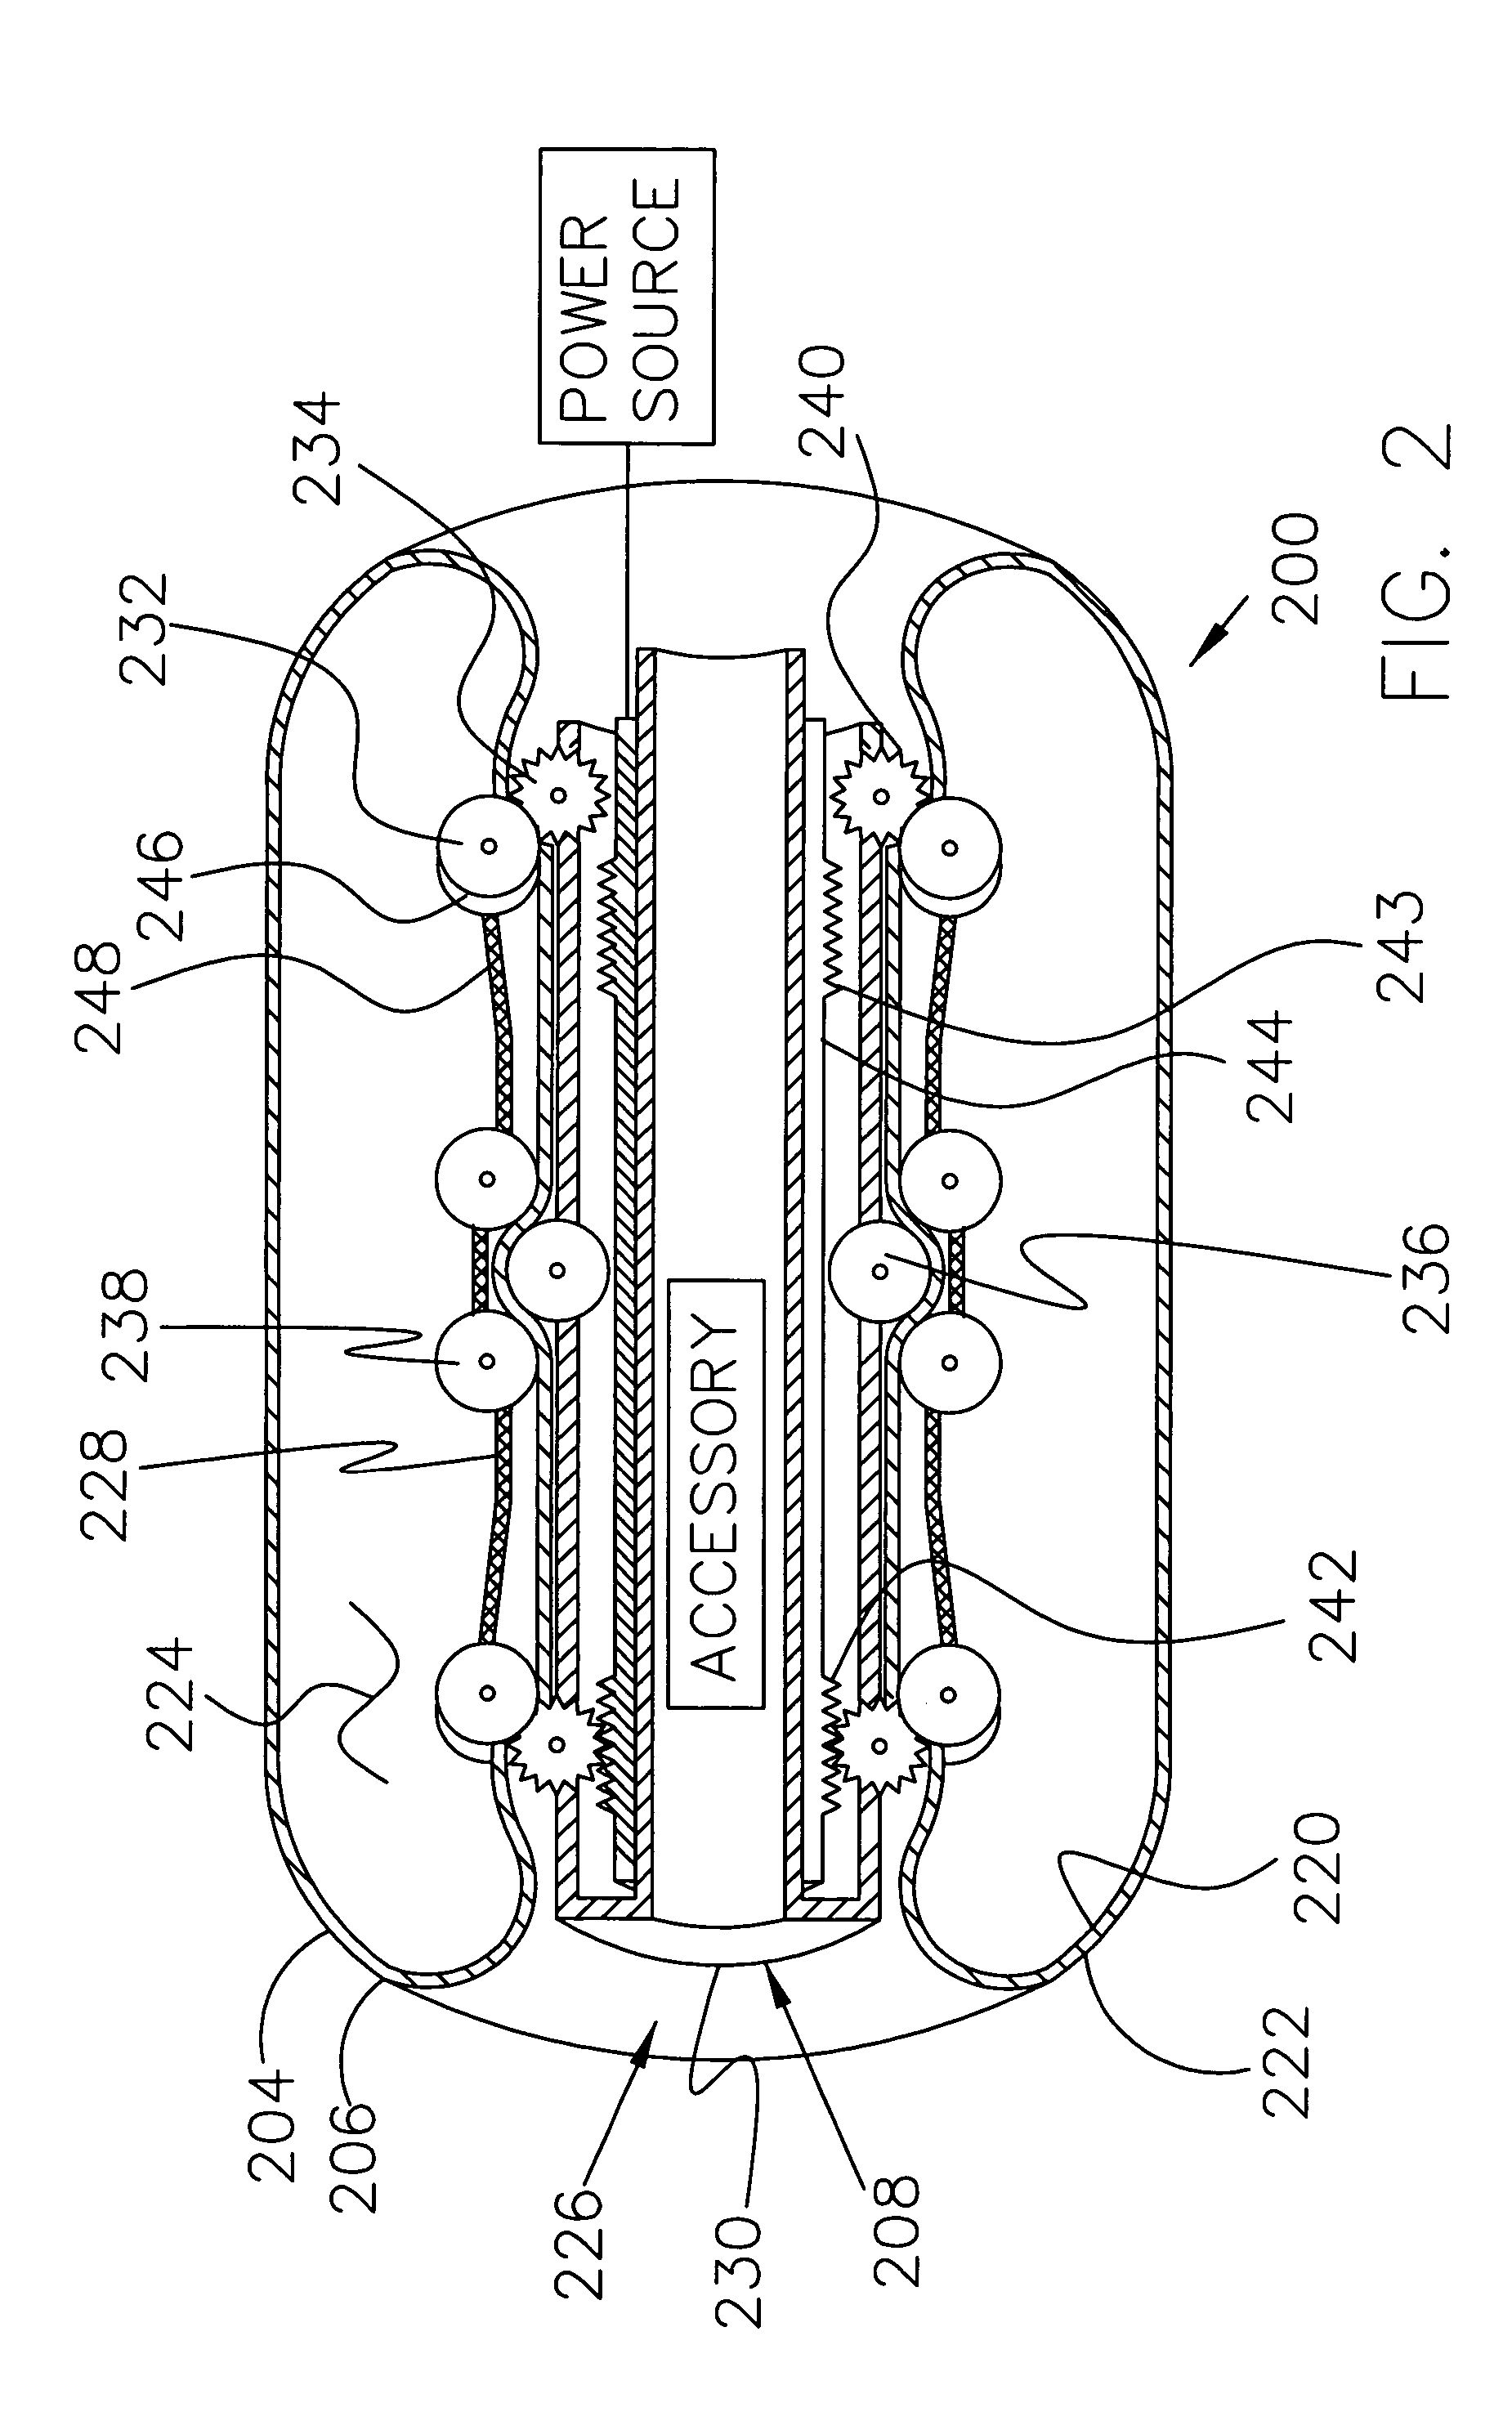 Propulsion mechanism for endoscopic systems